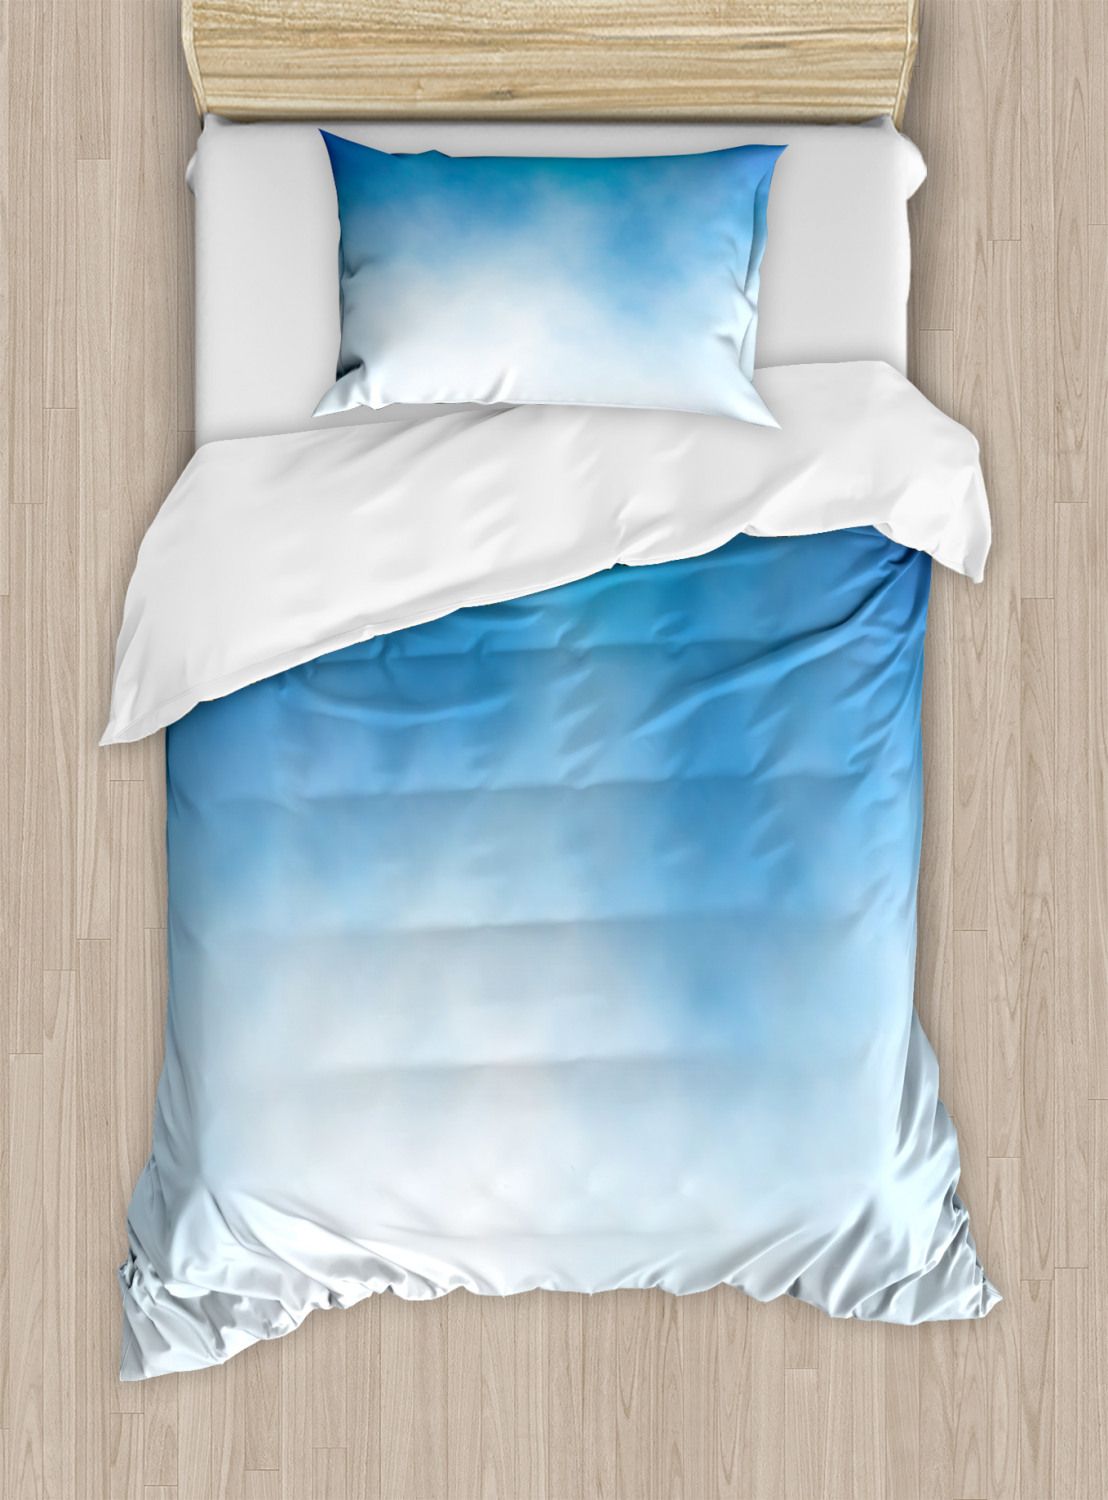 Blue Duvet Cover Set With Pillow Shams White Cloud In Clear Sky